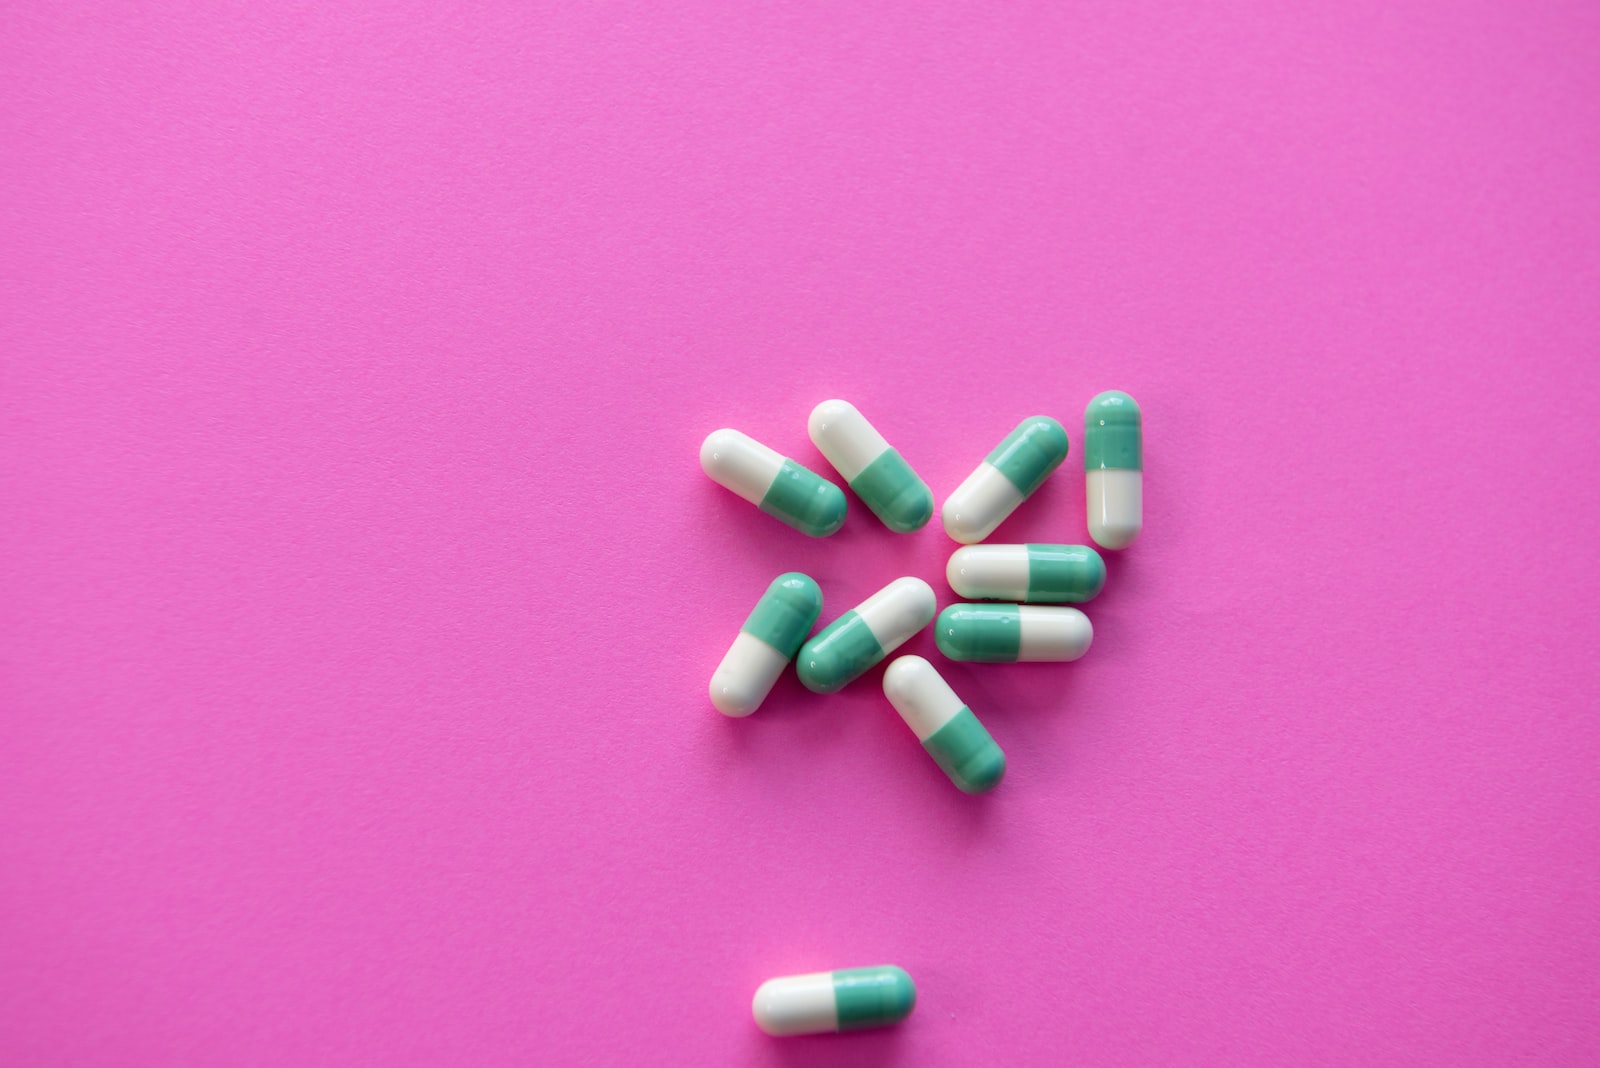 A Brief History of Antidepressants and SSRIs